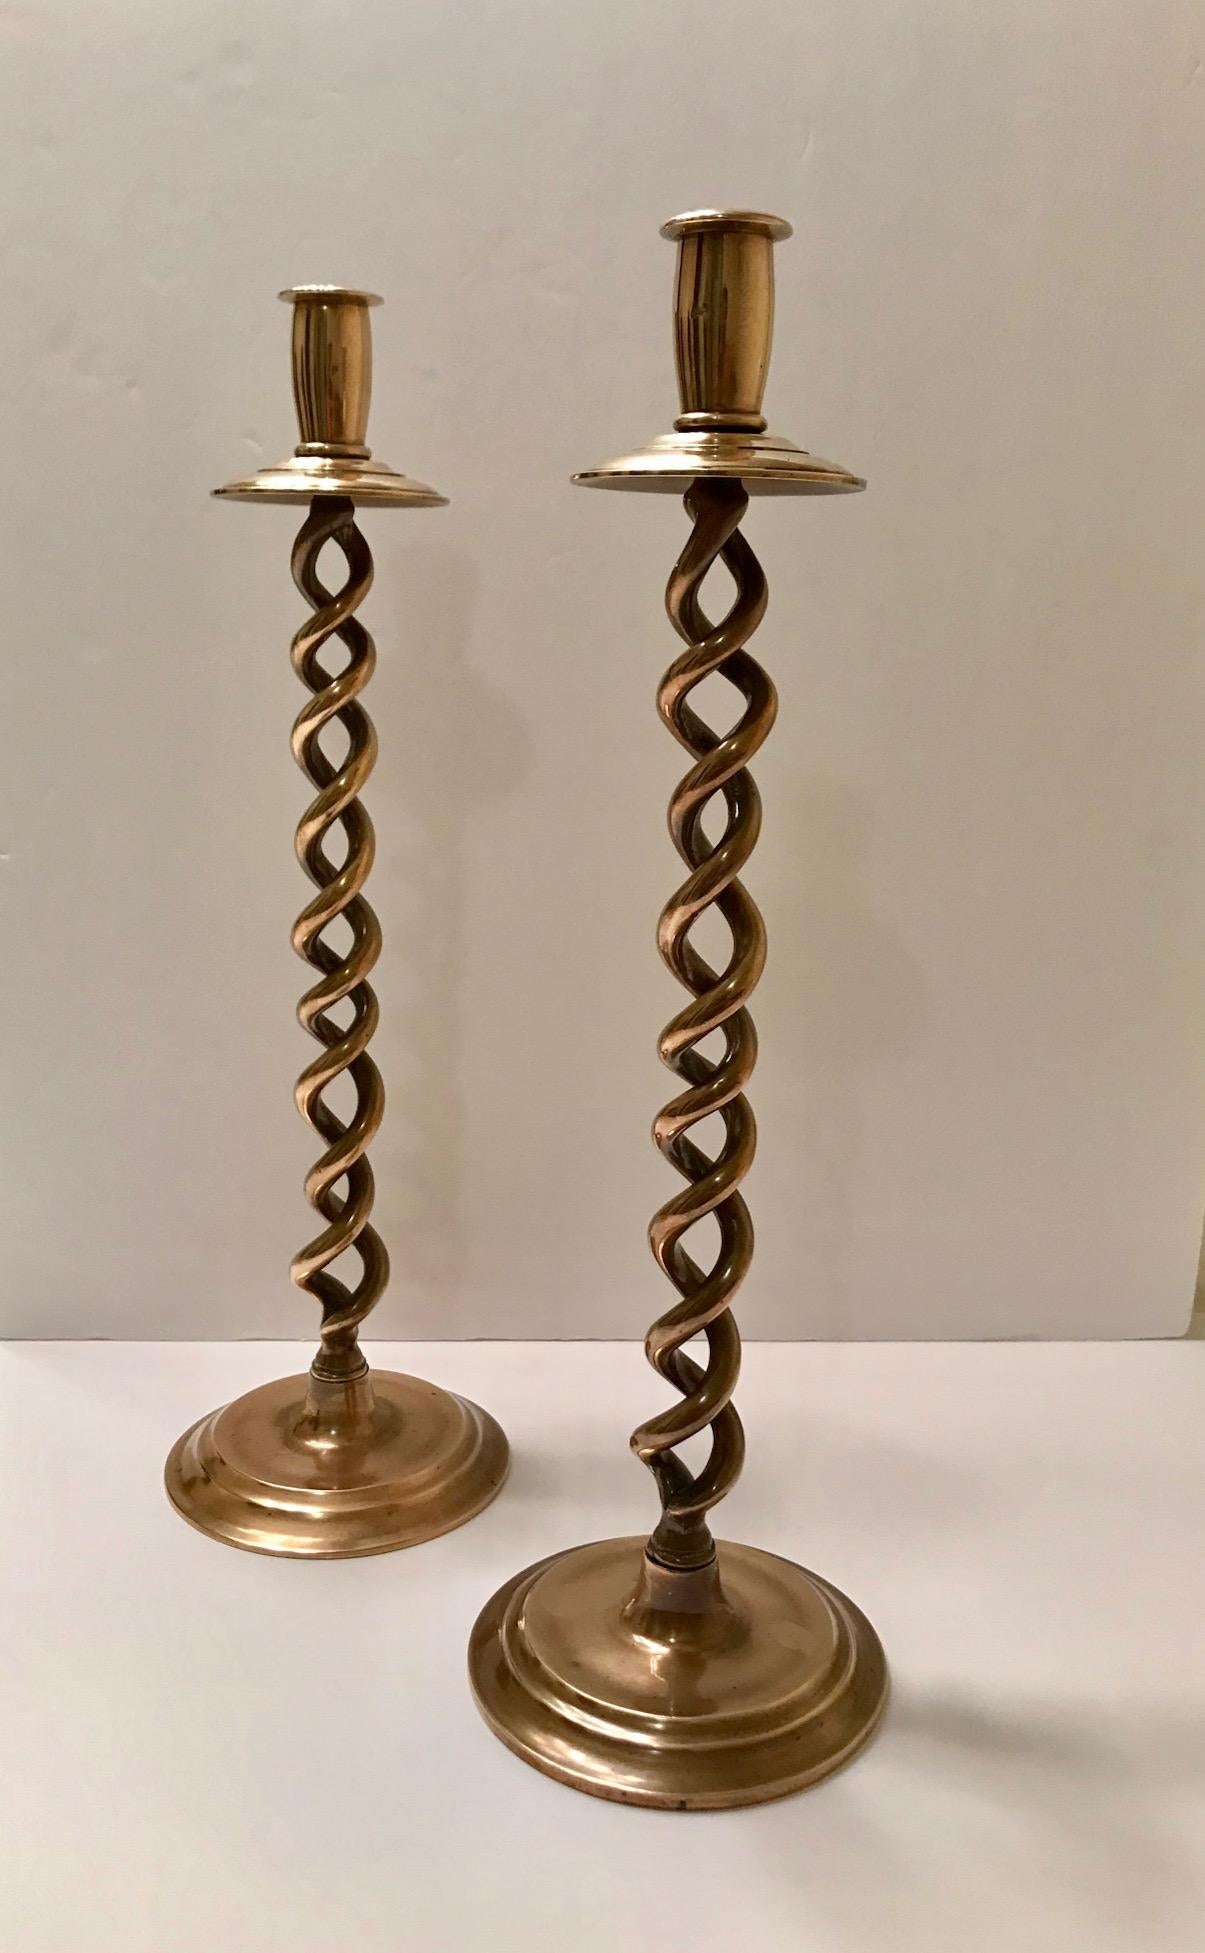 Pair of Mid-Century Modern candlesticks with Victorian Revival design. Beautiful candleholders in cast polished brass with braided stems or barley twist design. The candle holders have circular stepped bases and have solid weight to the touch. Minor